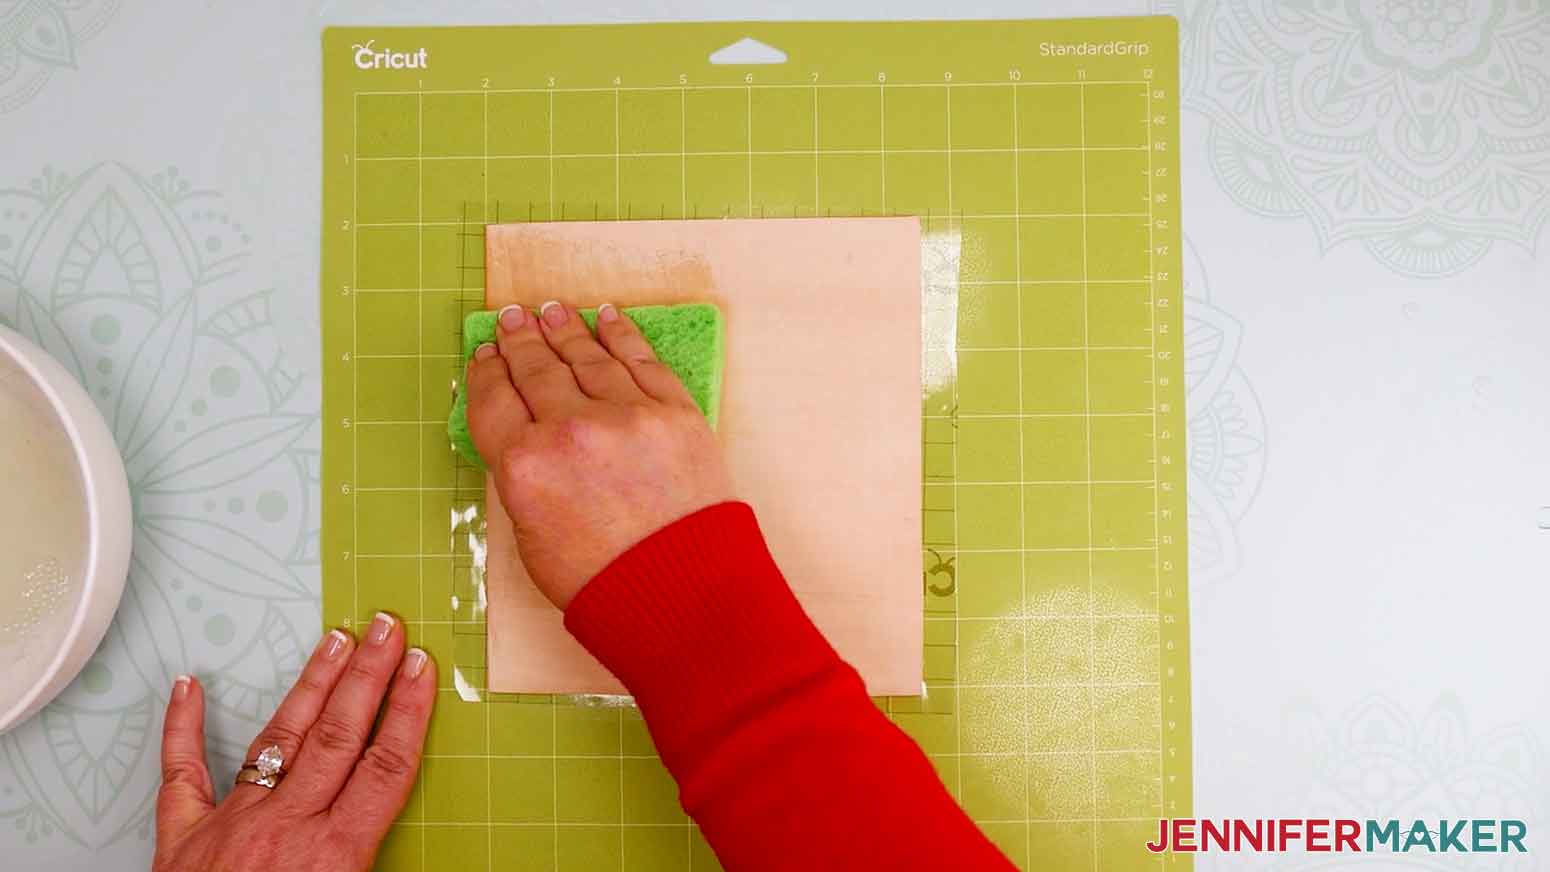 Use a kitchen sponge to dampen the leather before engraving.